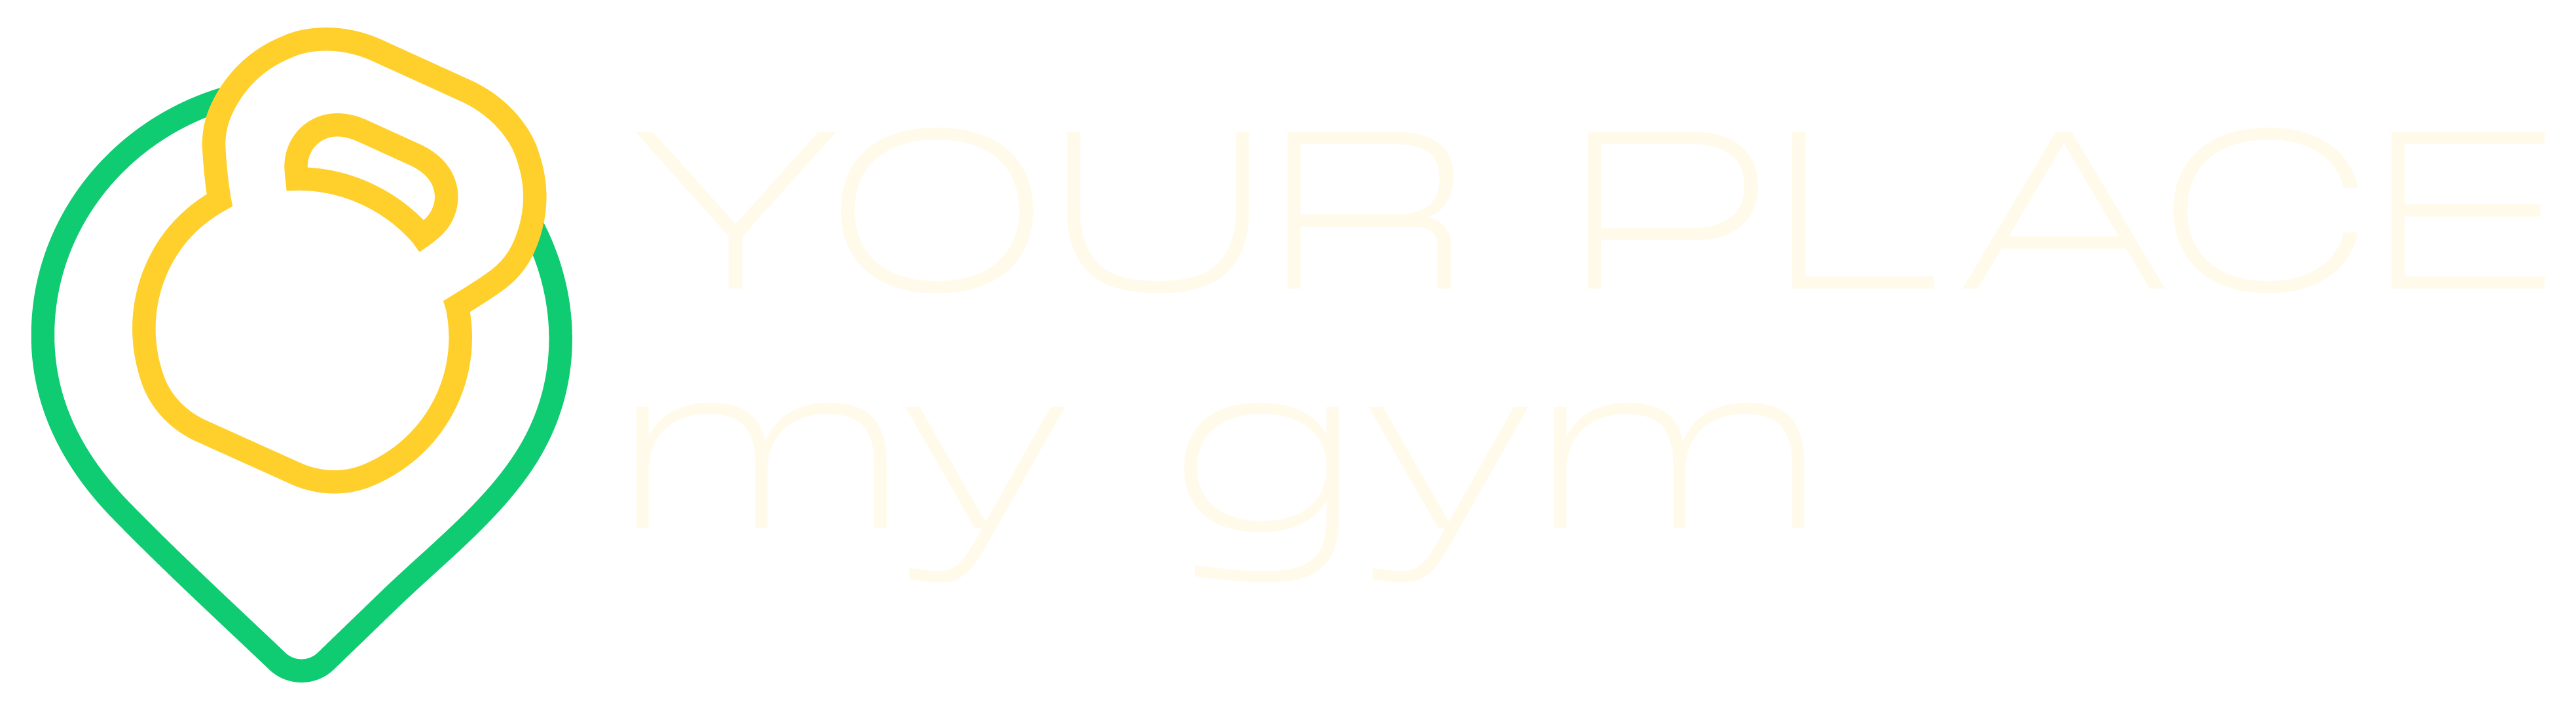 Your Place my gym